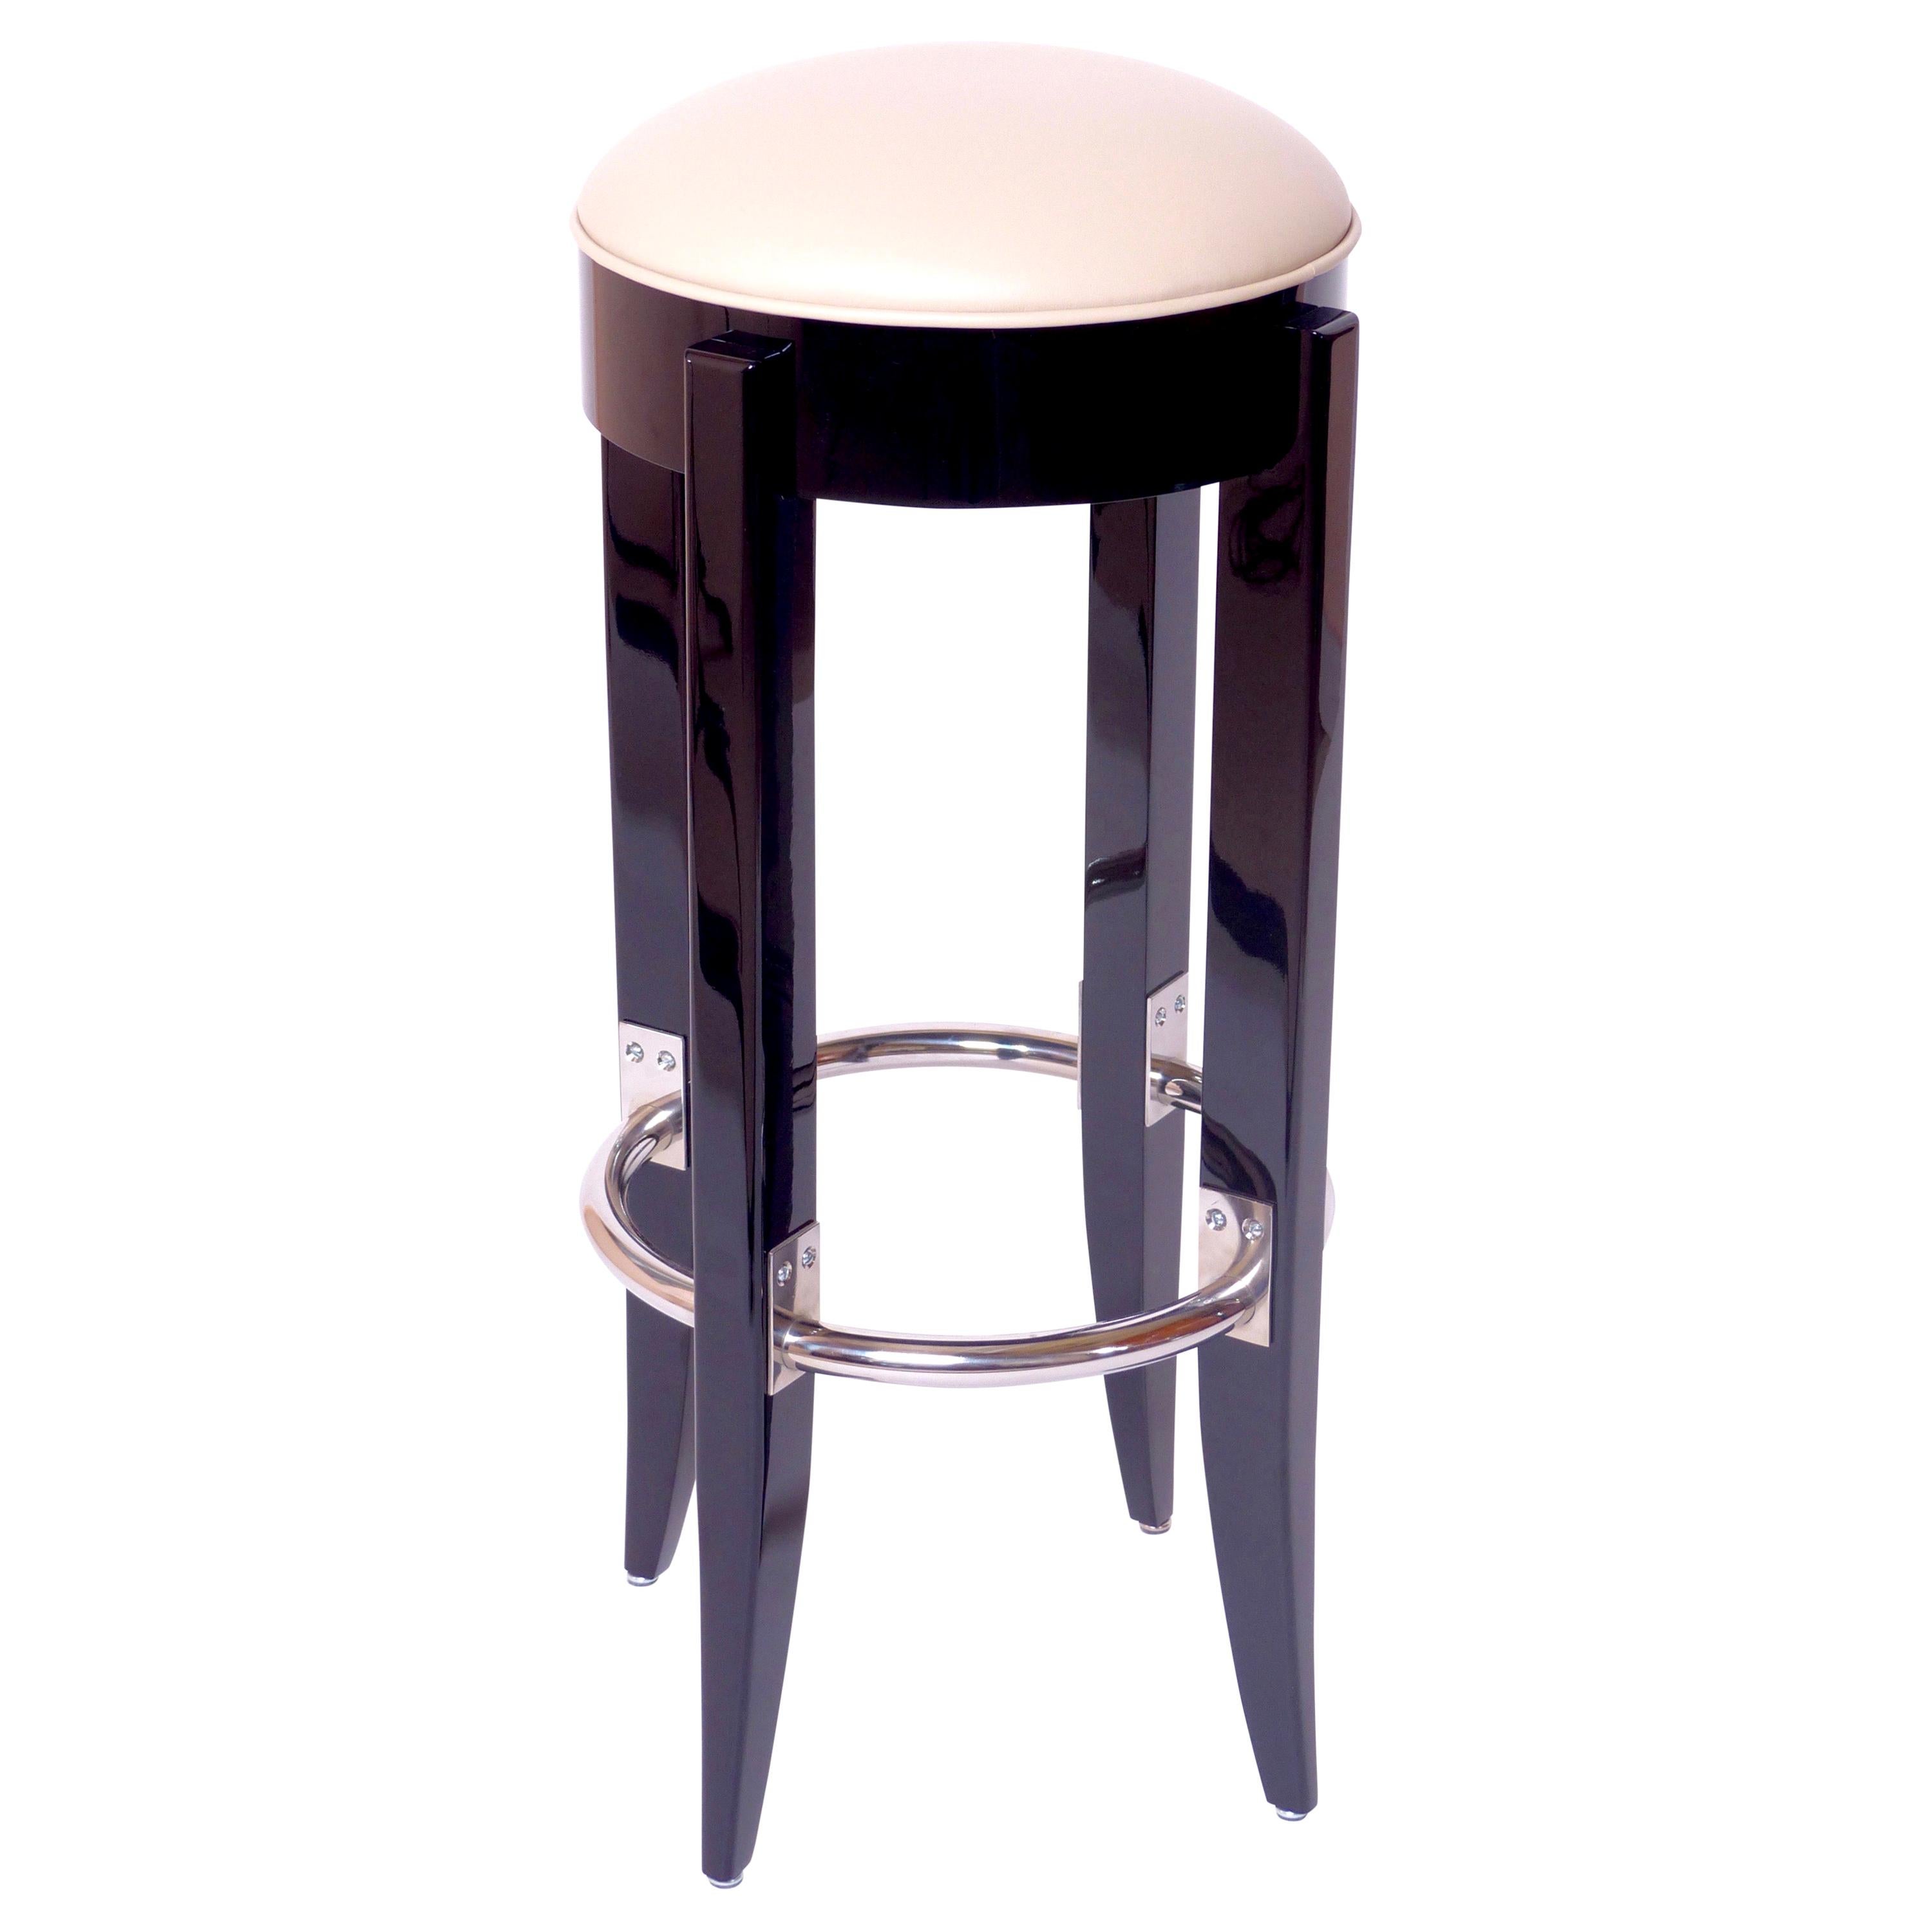 High Gloss Black Piano Lacquer Barstool in the Style of French Art Deco